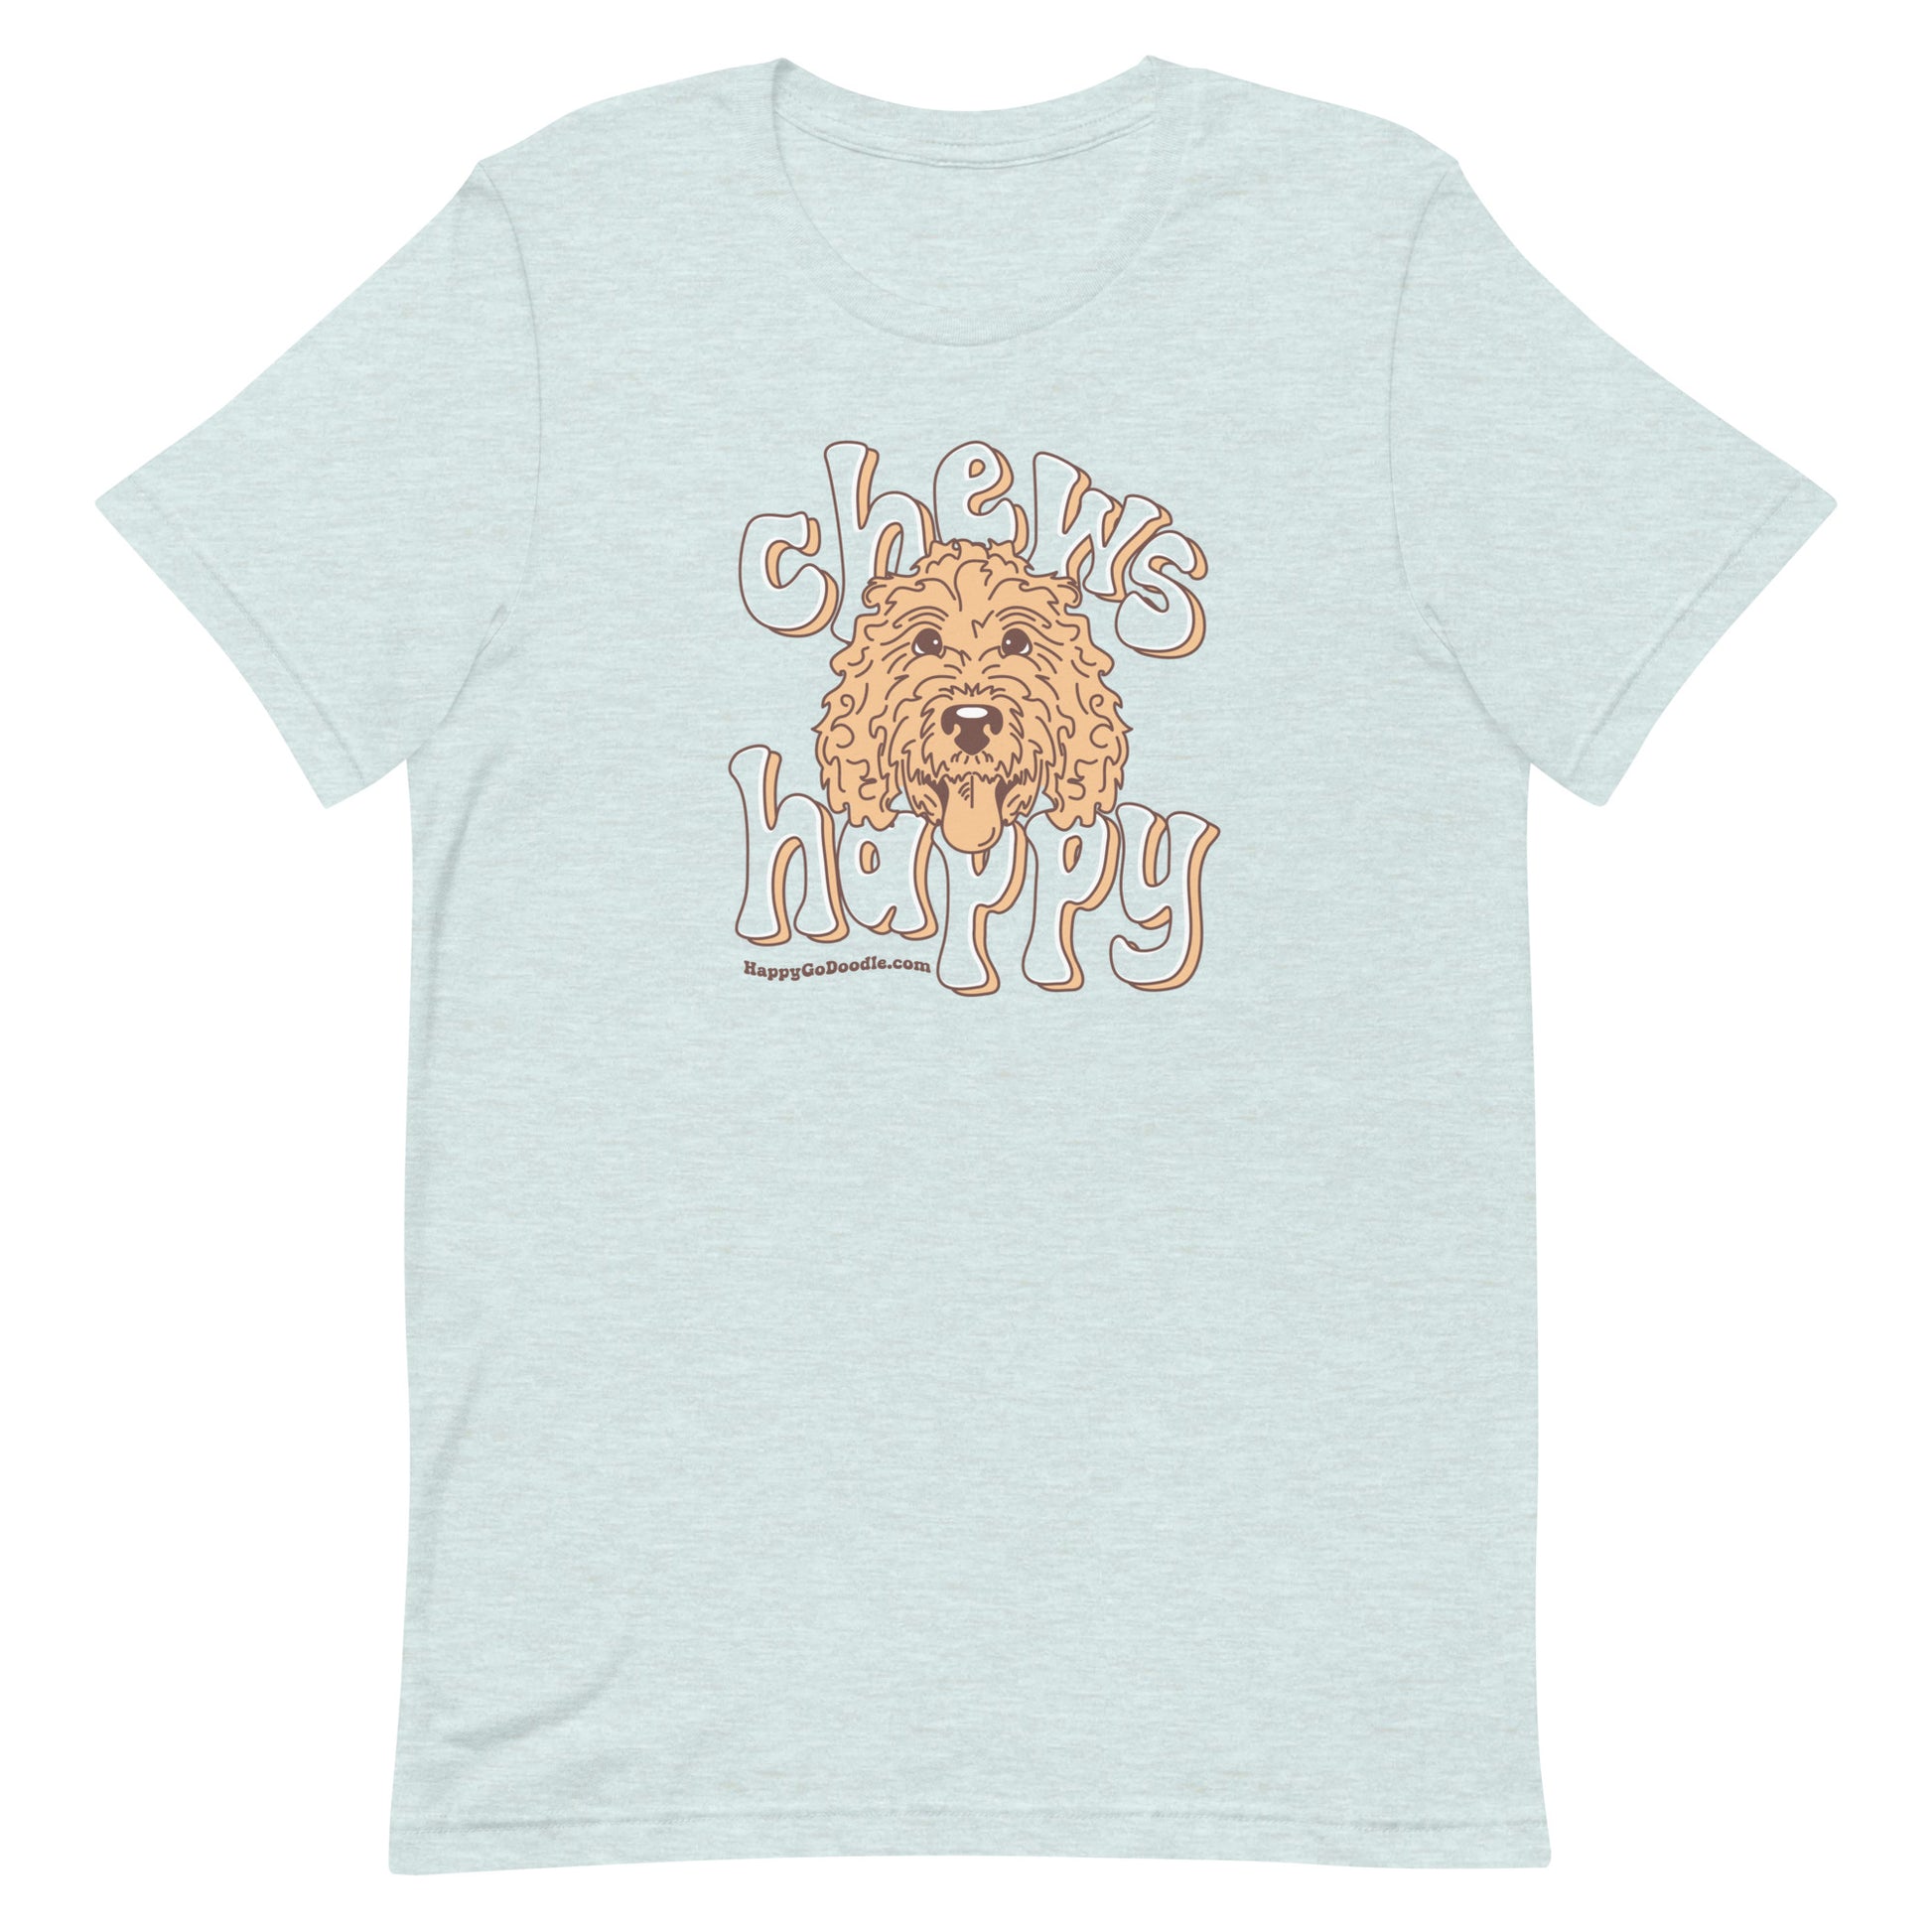 Goldendoodle crew neck sweatshirt with Goldendoodle face and words "Chews Happy" in ice blue color